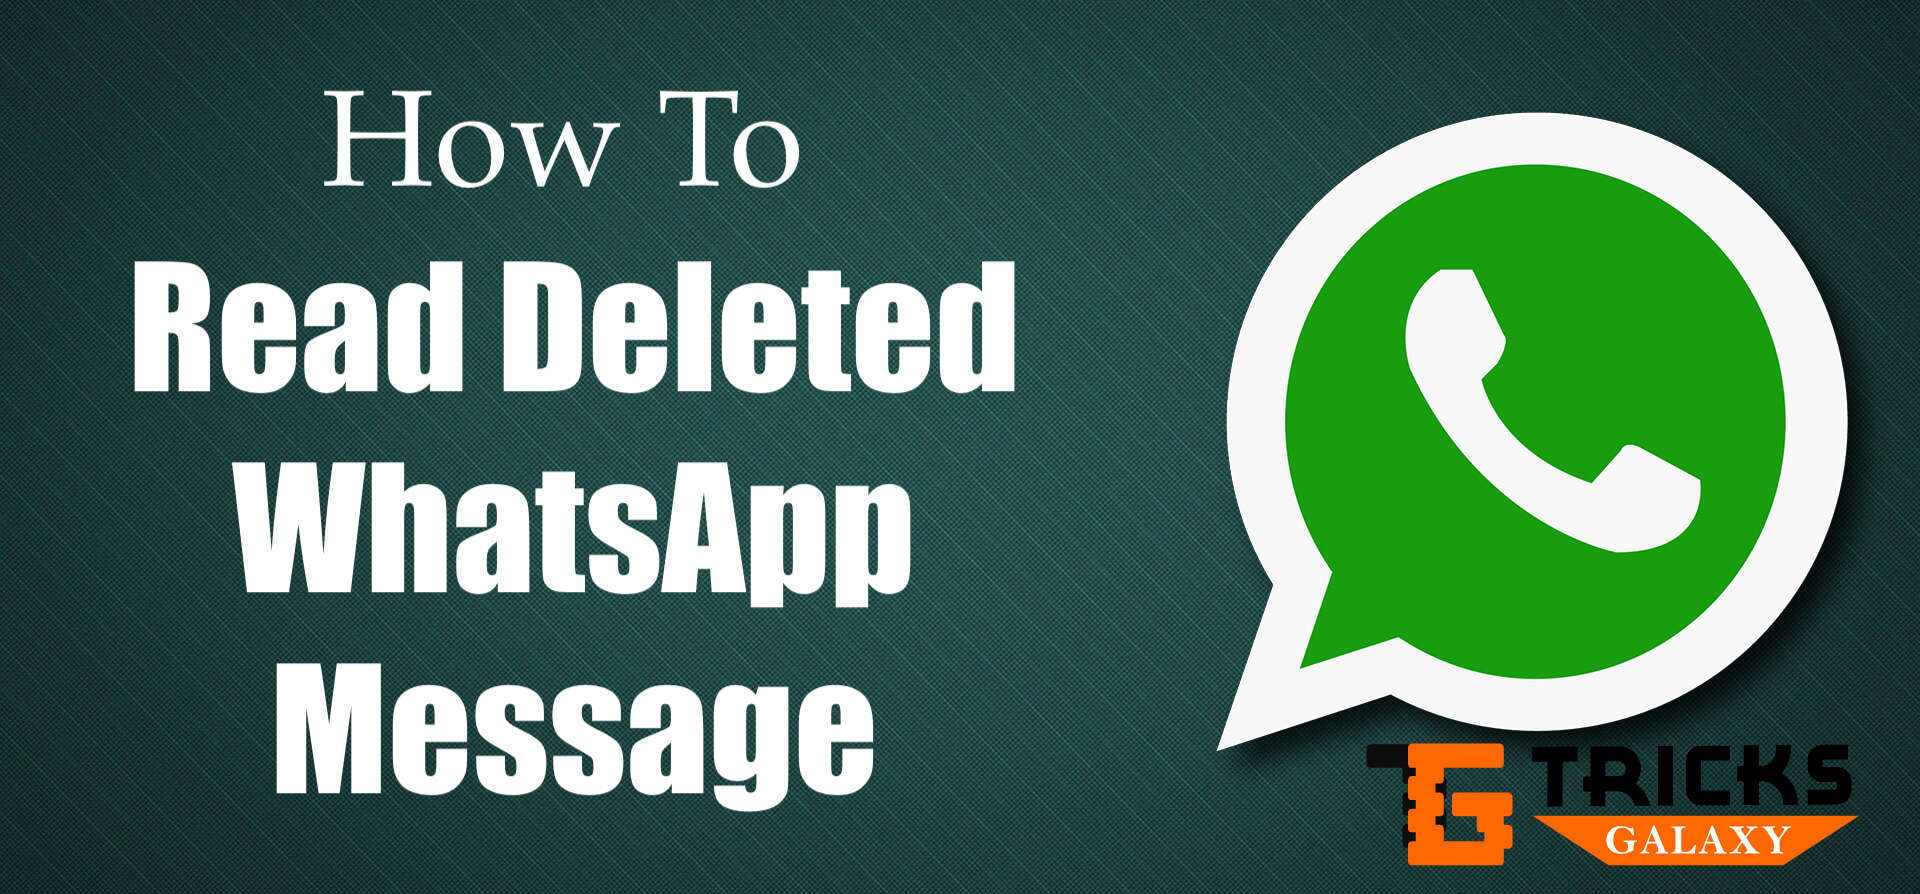 How to Read Deleted WhatsApp Message